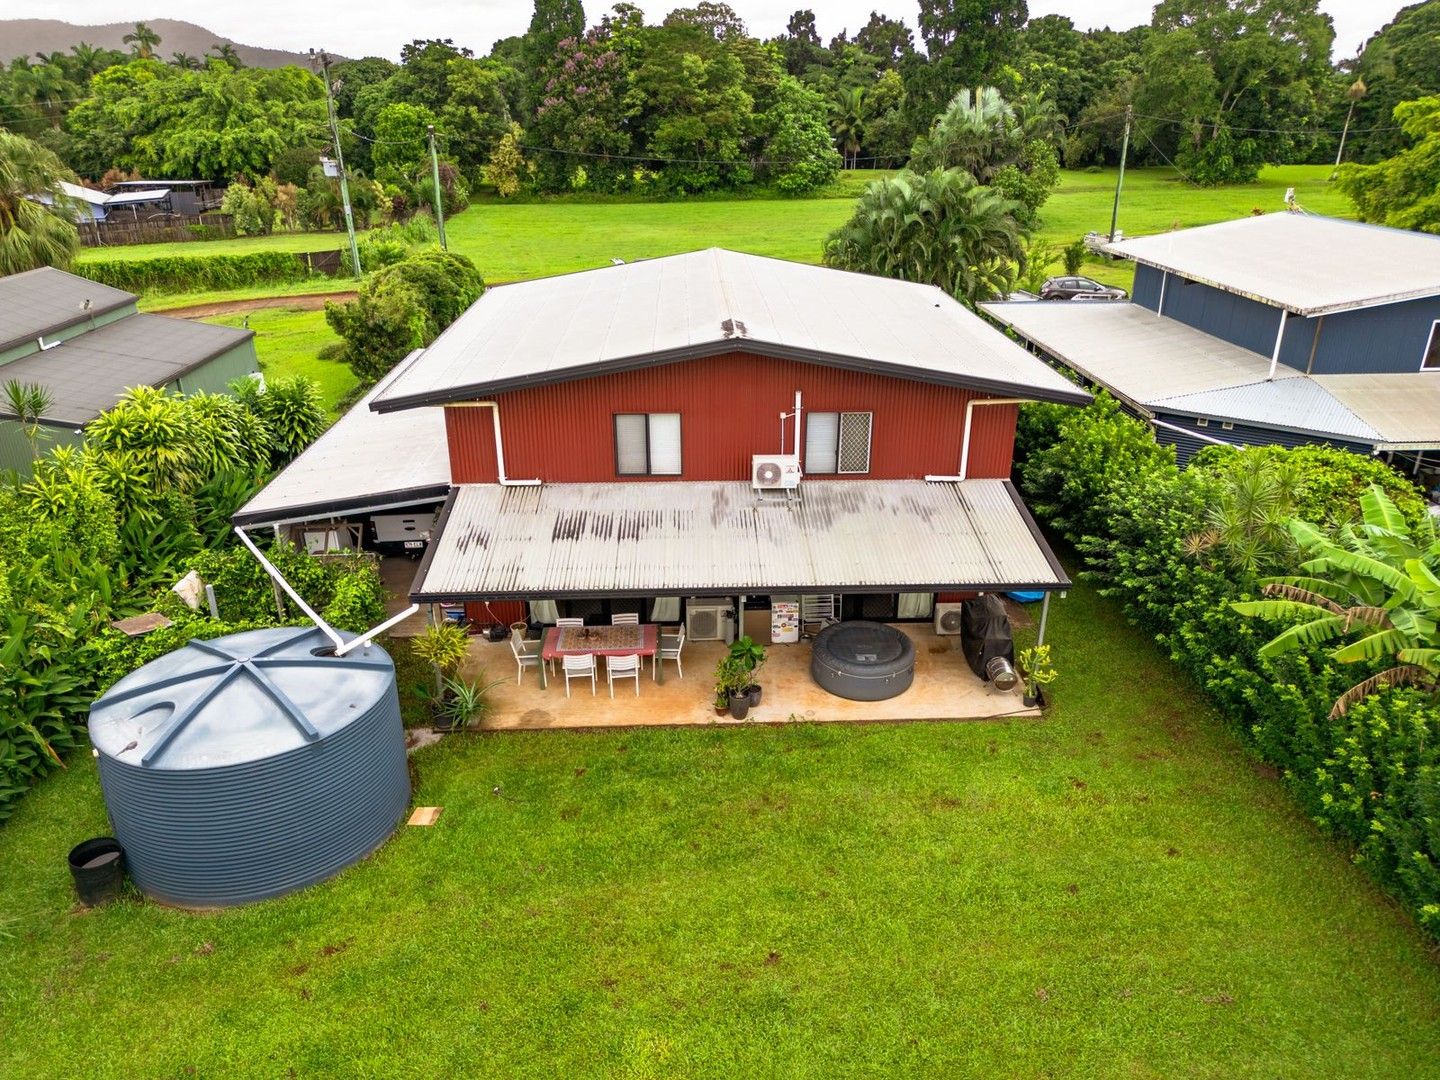 3 bedrooms Rural in 23/23 Wieland Street SOUTH JOHNSTONE QLD, 4859